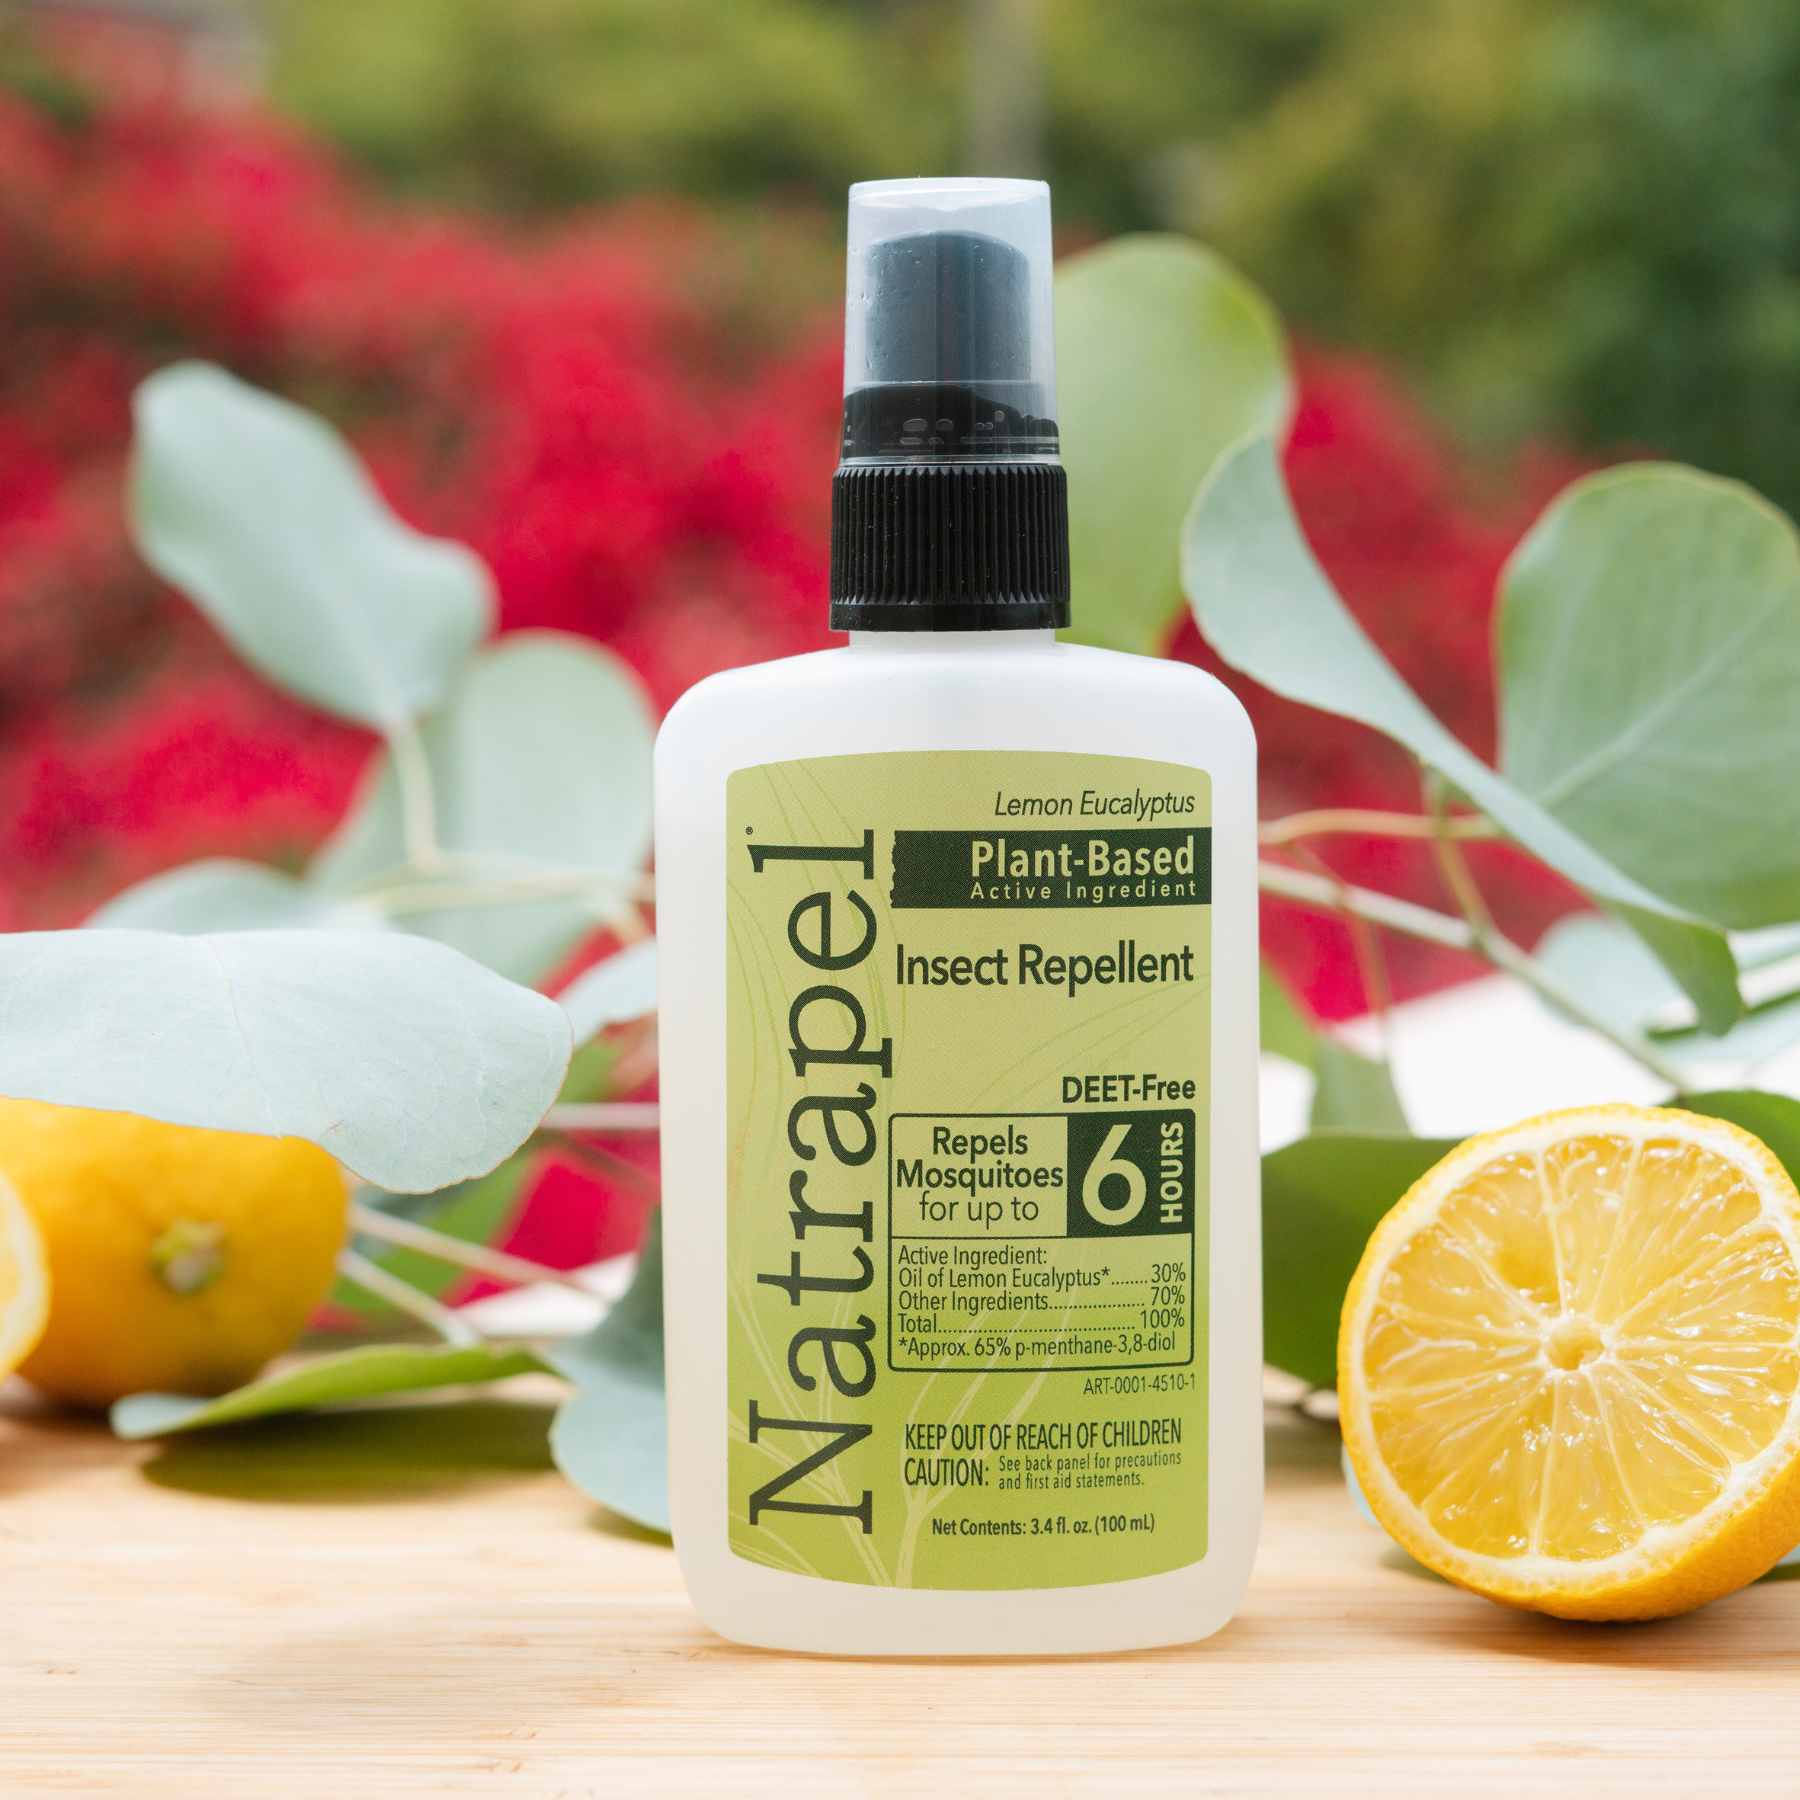 Natrapel Lemon Eucalyptus Plant Based Insect Repellent placed in front of lemons and eucalyptus leaves